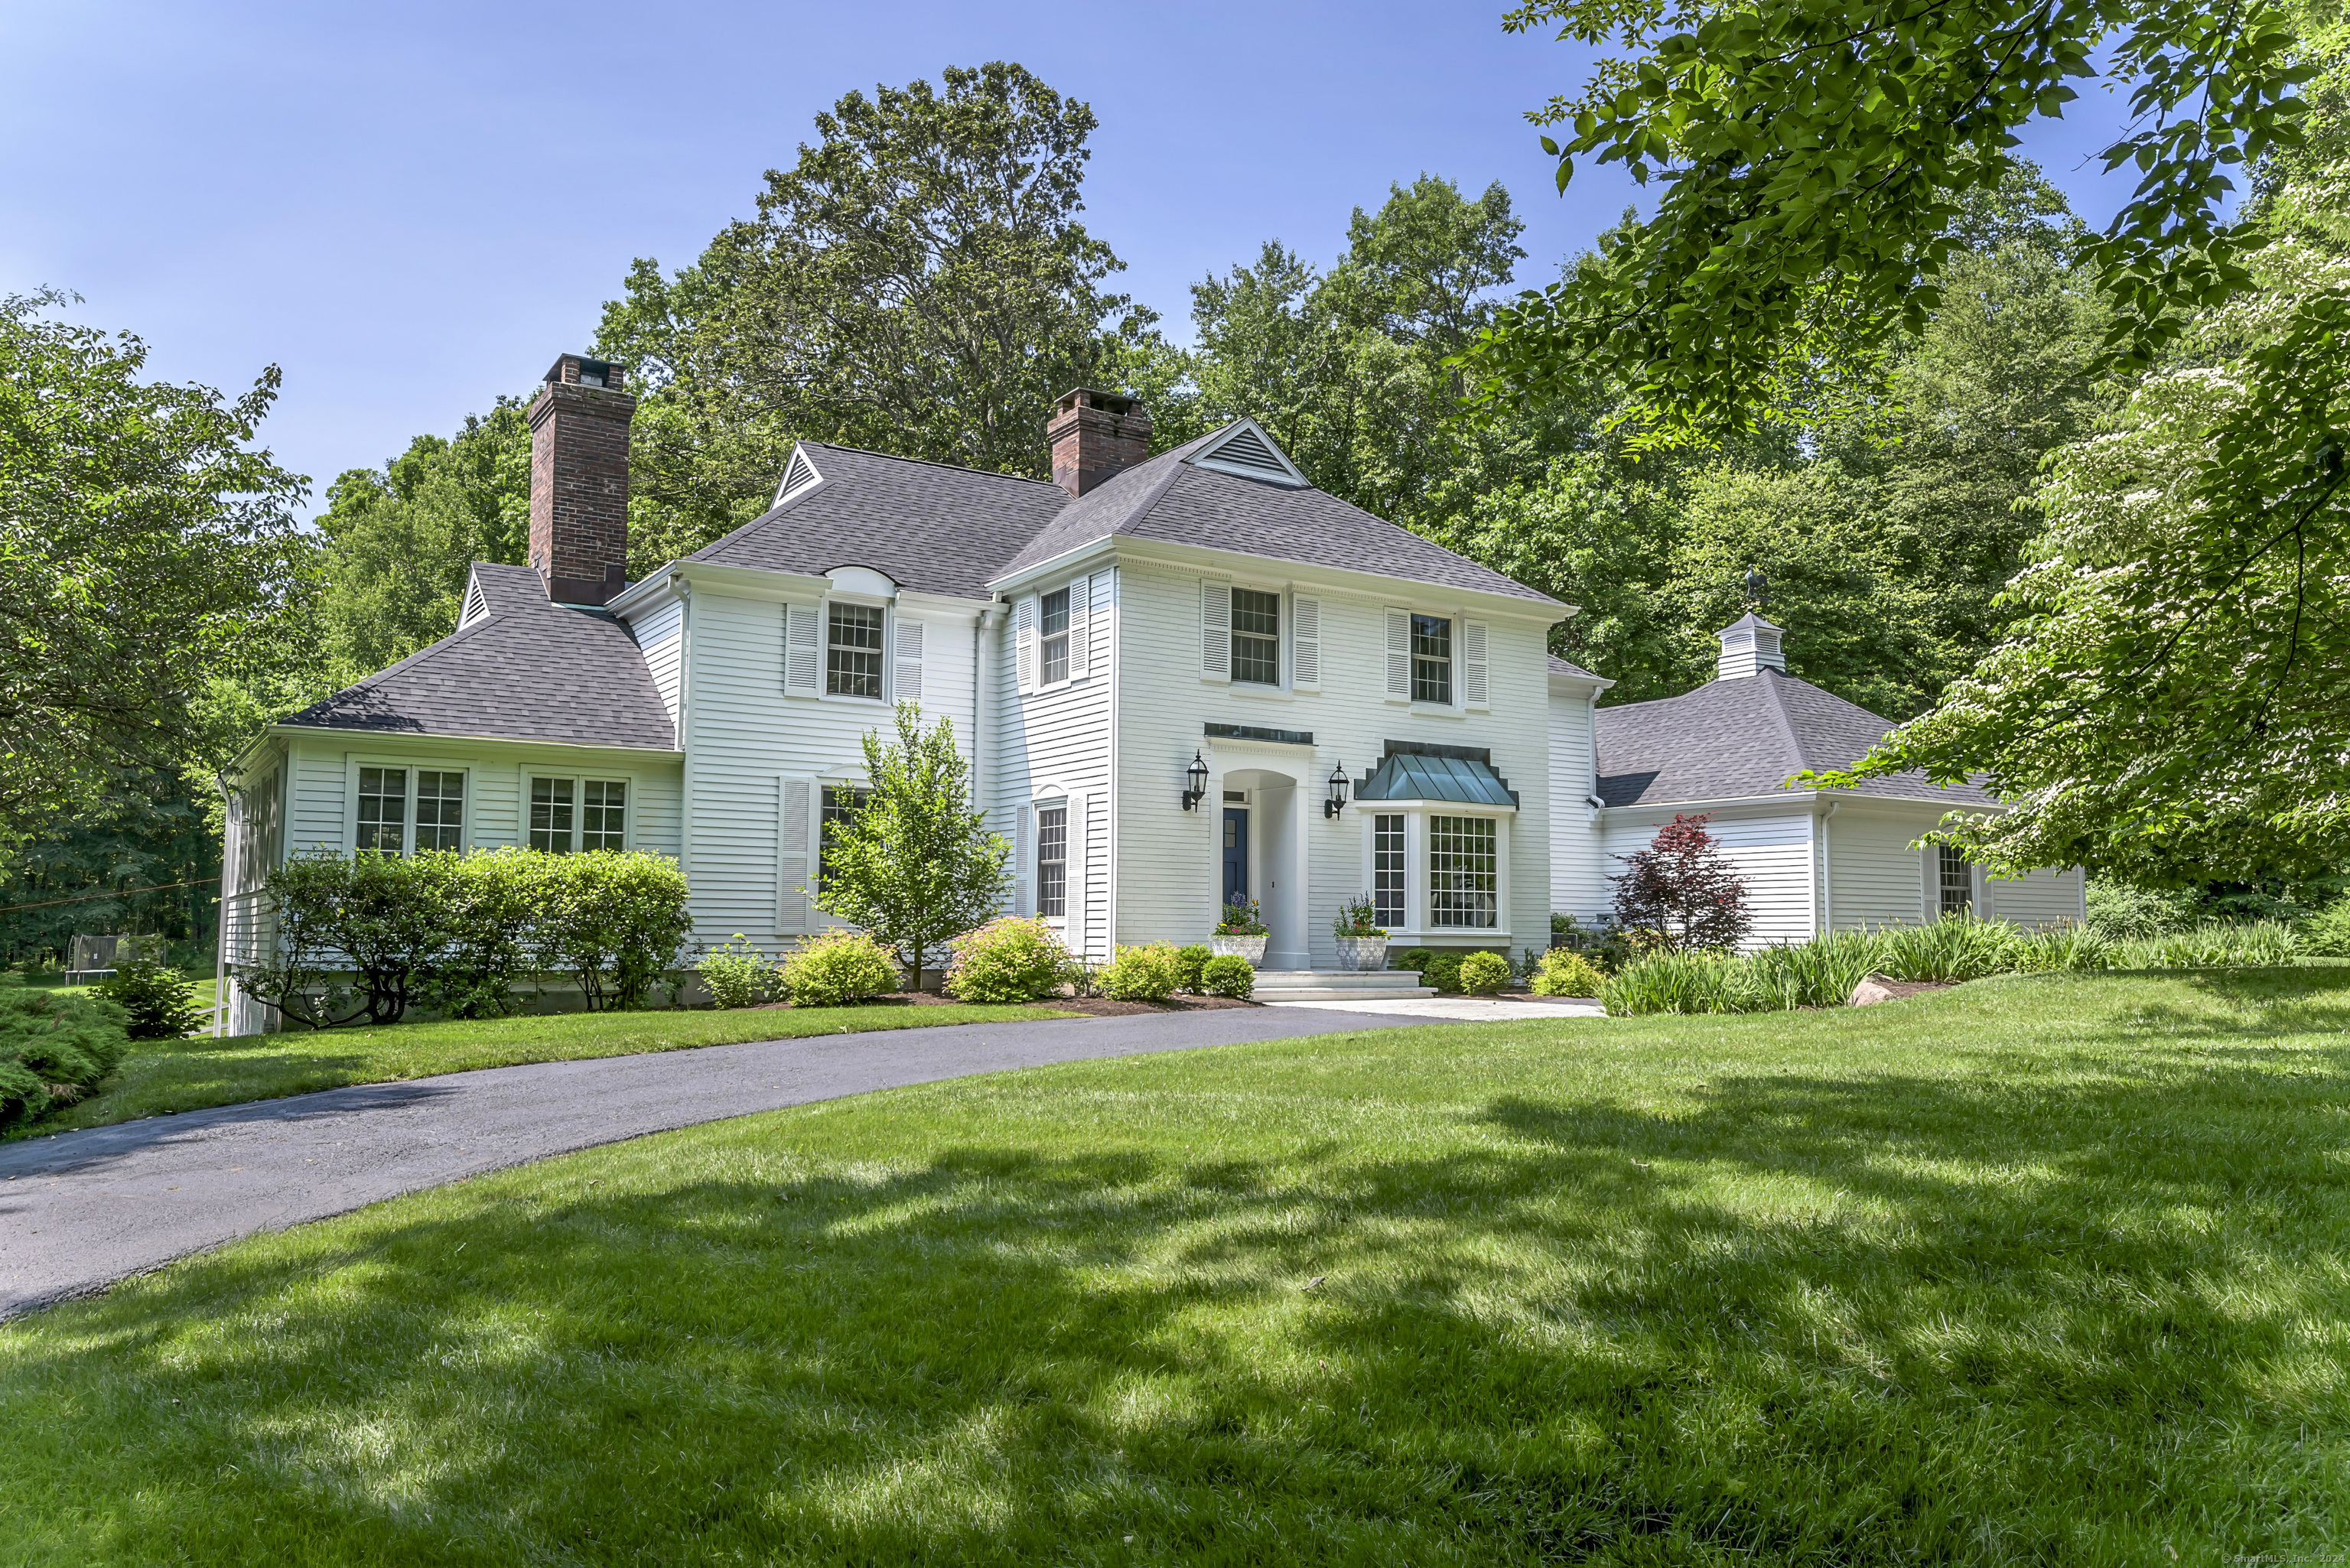 Exceptional turn-key Colonial in sought after SW Ridgefield on the Westchester border. Sophistication at everyturn! No expense spared in creating an exquisite transitional design w/high-end finishes throughout - HW Flooring, inviting fireplaces, designer wall-coverings and lighting, etc. Wonderful main level showcases: Living/Dining Rm w/FP, Family Rm complete w/wet bar & Large FP + French doors leading to a versatile Office/Sunroom/Playroom with site lines to the stunning property. The ultra custom eat-in KIT equipped w/professional-grade appliances is a Chef's dream. Laundry Rm, Mudrm & 2 Baths complete the Main level. Upstairs, the luxurious Primary Suite boasts His/Her's marble Baths with radiant heated floors, & large walk-in closet. 3 additional BR's plus 2 Renovated Full Baths and a fantastic, NEW sun-filled Home Office. Spacious, Lower Level offers a recreational space w/sliding glass doors leading to a Gym, Half Bath, and a convenient Pool Changing Room for easy access to the heated Gunite pool and spa amidst the professionally landscaped yard w/a babbling brook. The Barn provides a third Garage Space plus storage + countless options for additional living, entertaining space. Bordering numerous acres of Open Space provides added privacy. Natural stone outcroppings & mature trees create the perfect, private retreat. Whole-house generator. Minutes to Ridgefield's vibrant downtown - CT's #1 Cultural District! Approx 1 HR to NYC and quick drive to Metro North Trains.